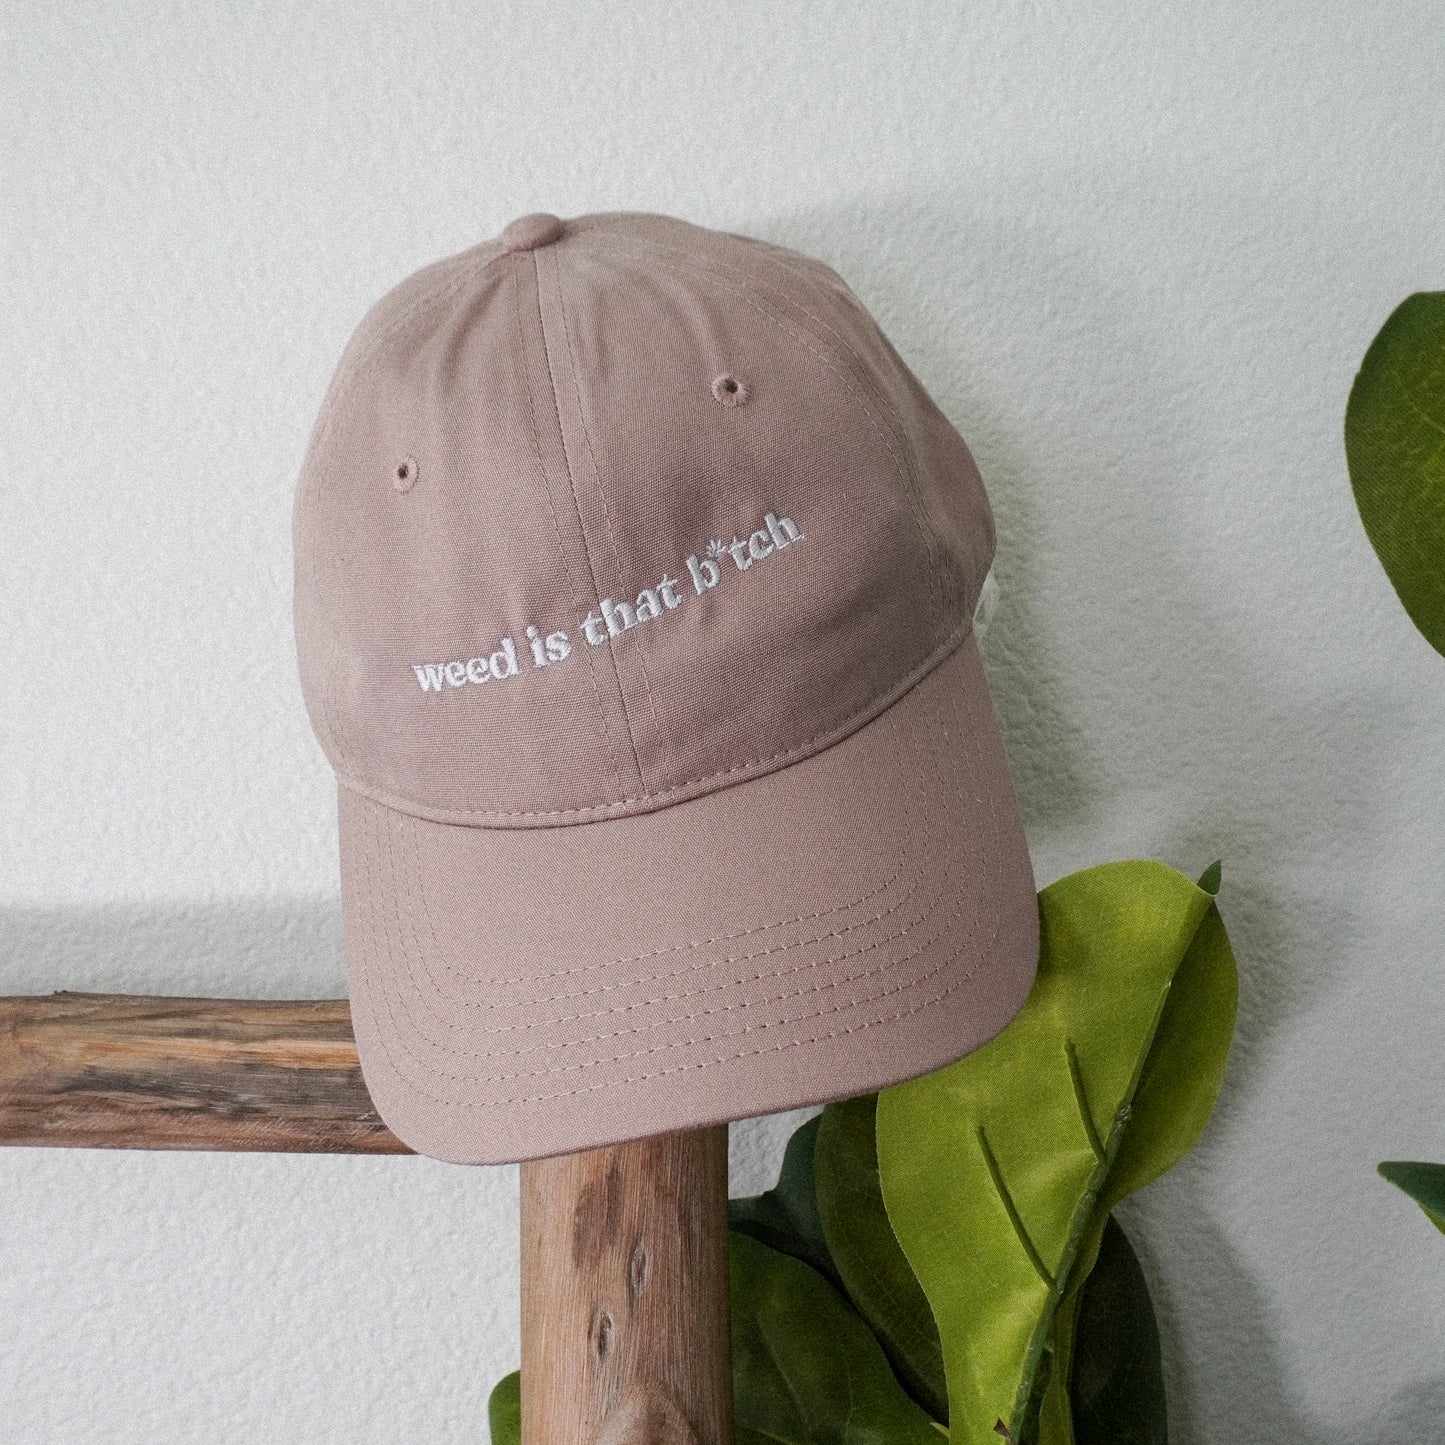 Weed is That B*tch Embroidered Cap